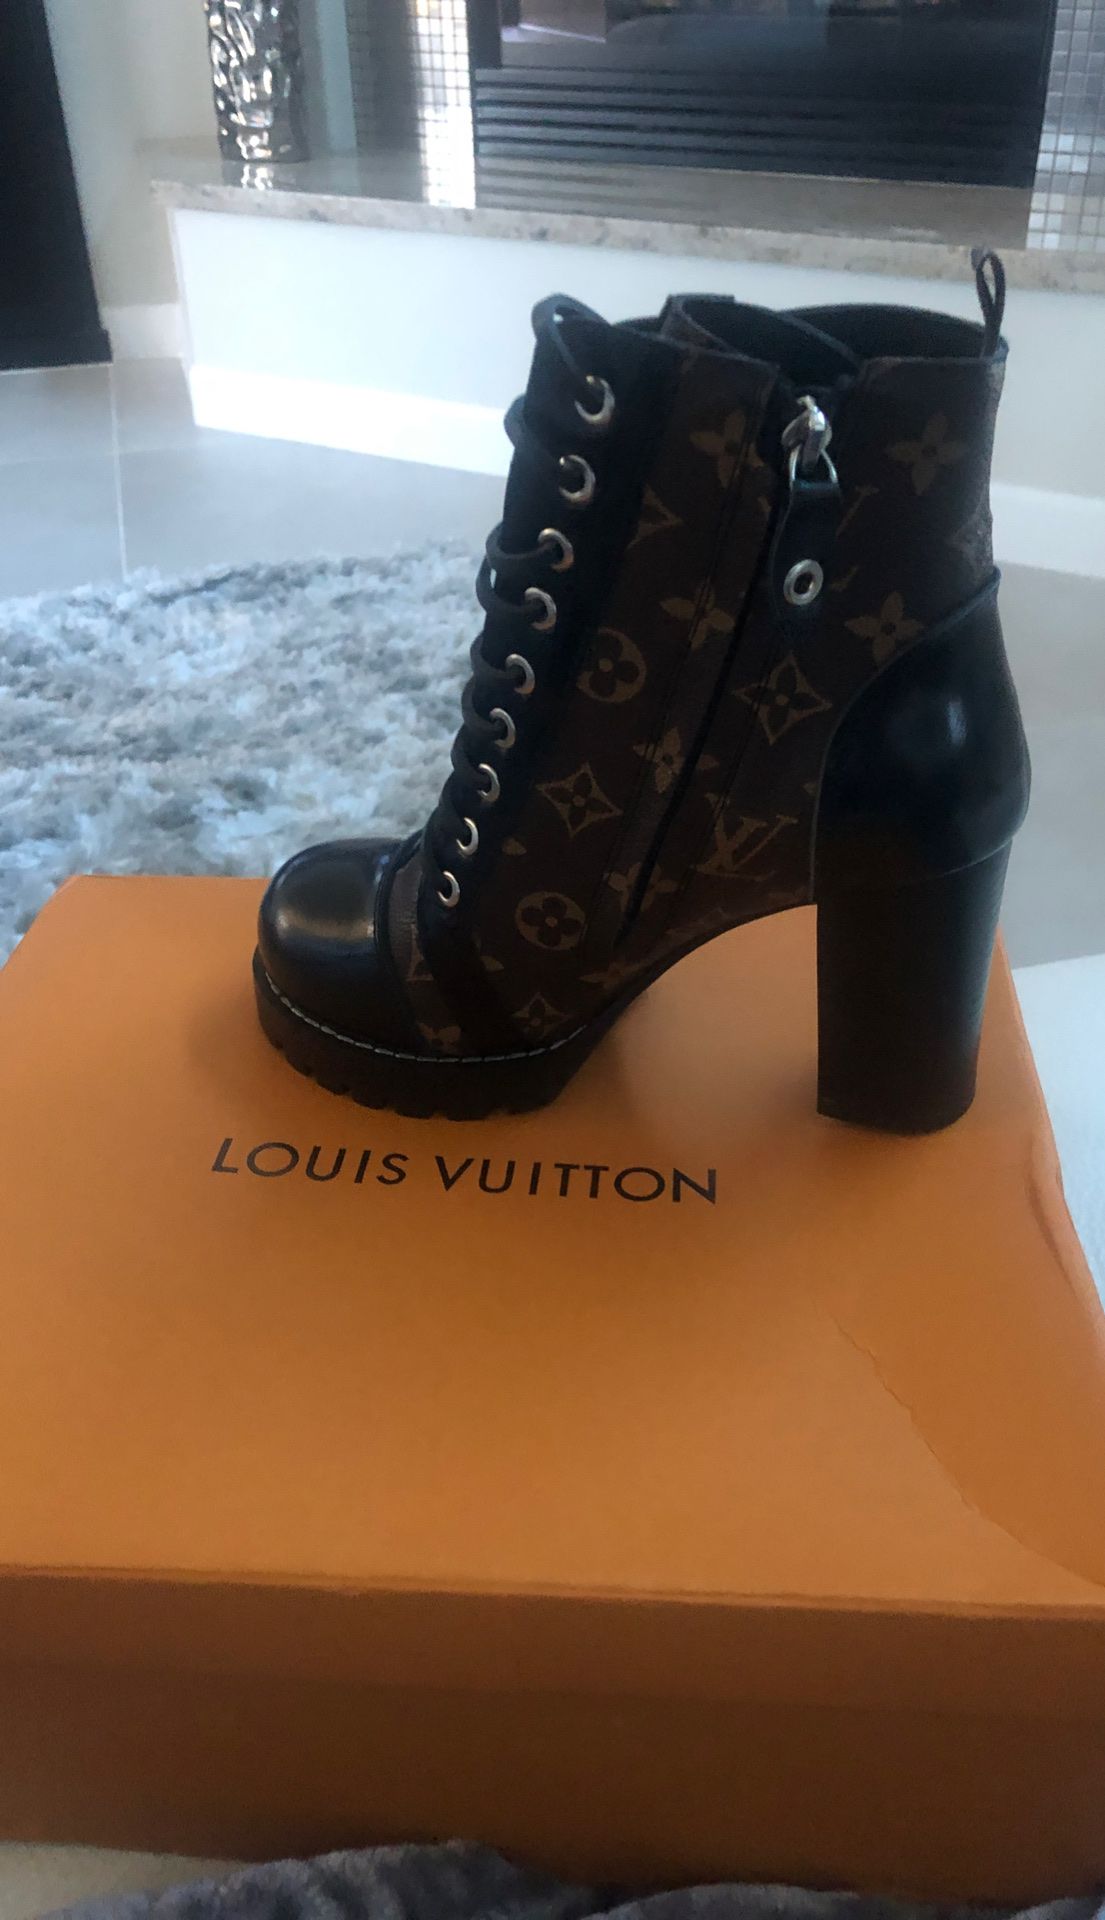 Louis Vuitton brand boots Star trail ankle boots women’s size 38 7 USA